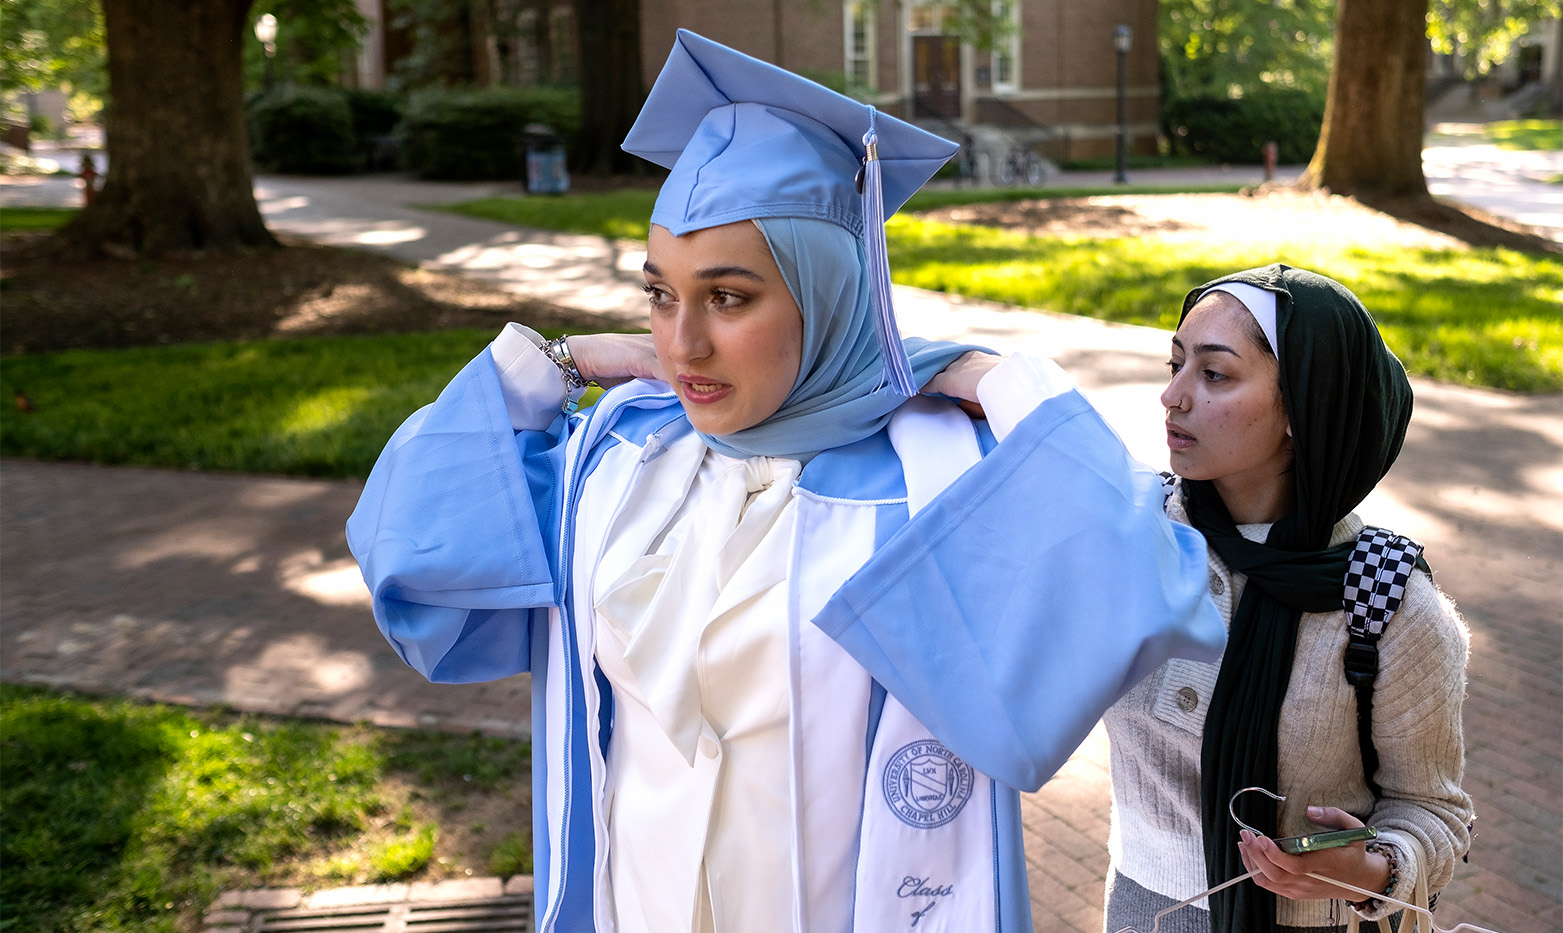 A UNC student has their graduation gown adjusted.